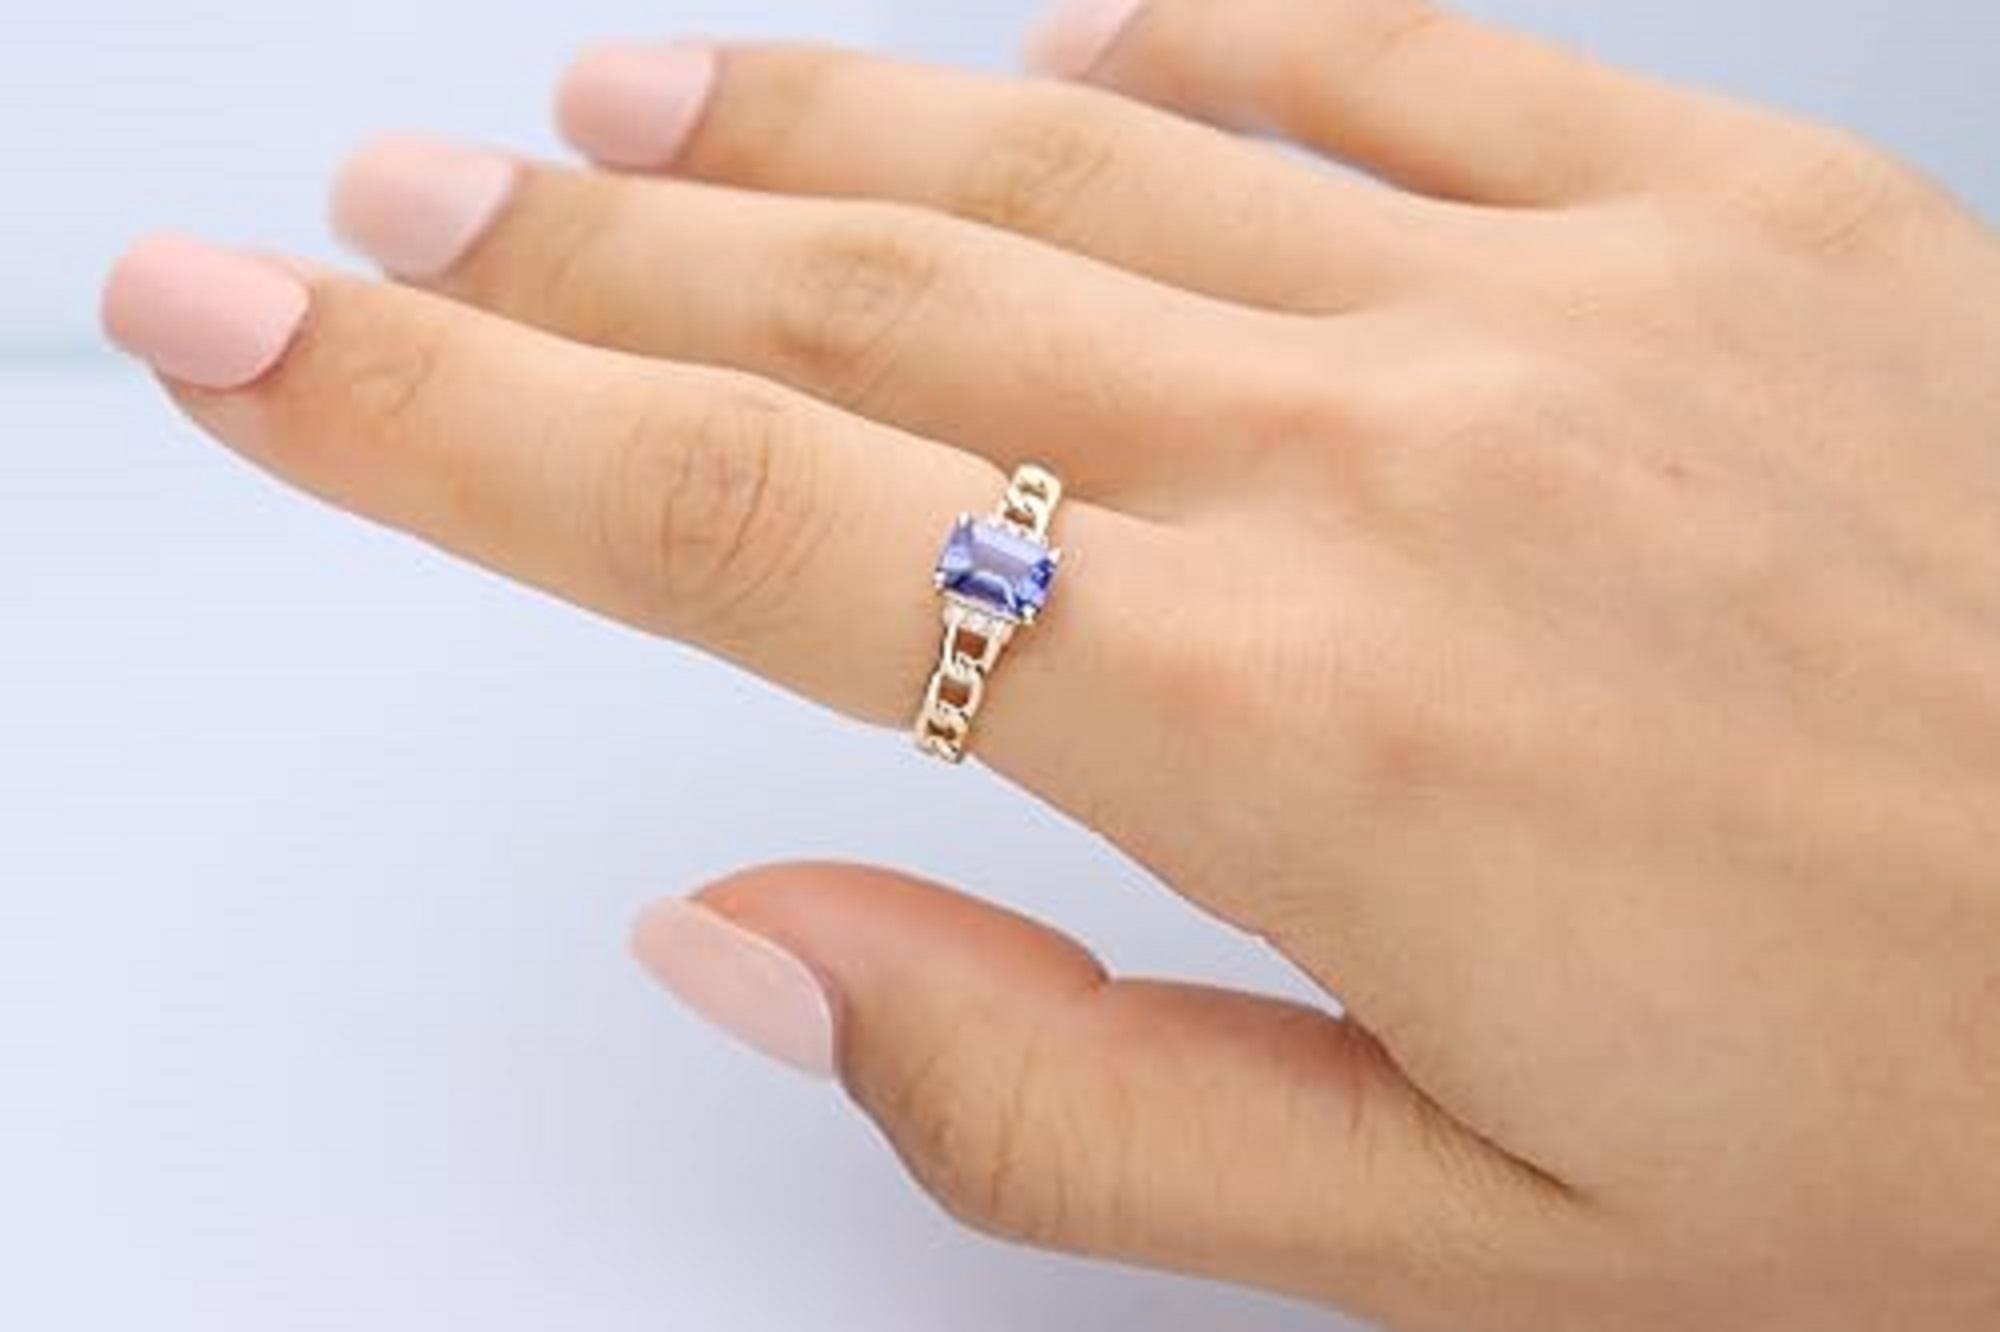 Decorate yourself in elegance with this Ring is crafted from 14-karat Yellow Gold by Gin & Grace. This Ring is made up of 5*7 Emerald-cut Tanzanite (1 Pcs) 0.91 carat and Round-cut White Diamond (6 Pcs) 0.04 carat. This Ring is weight 2.51 grams.